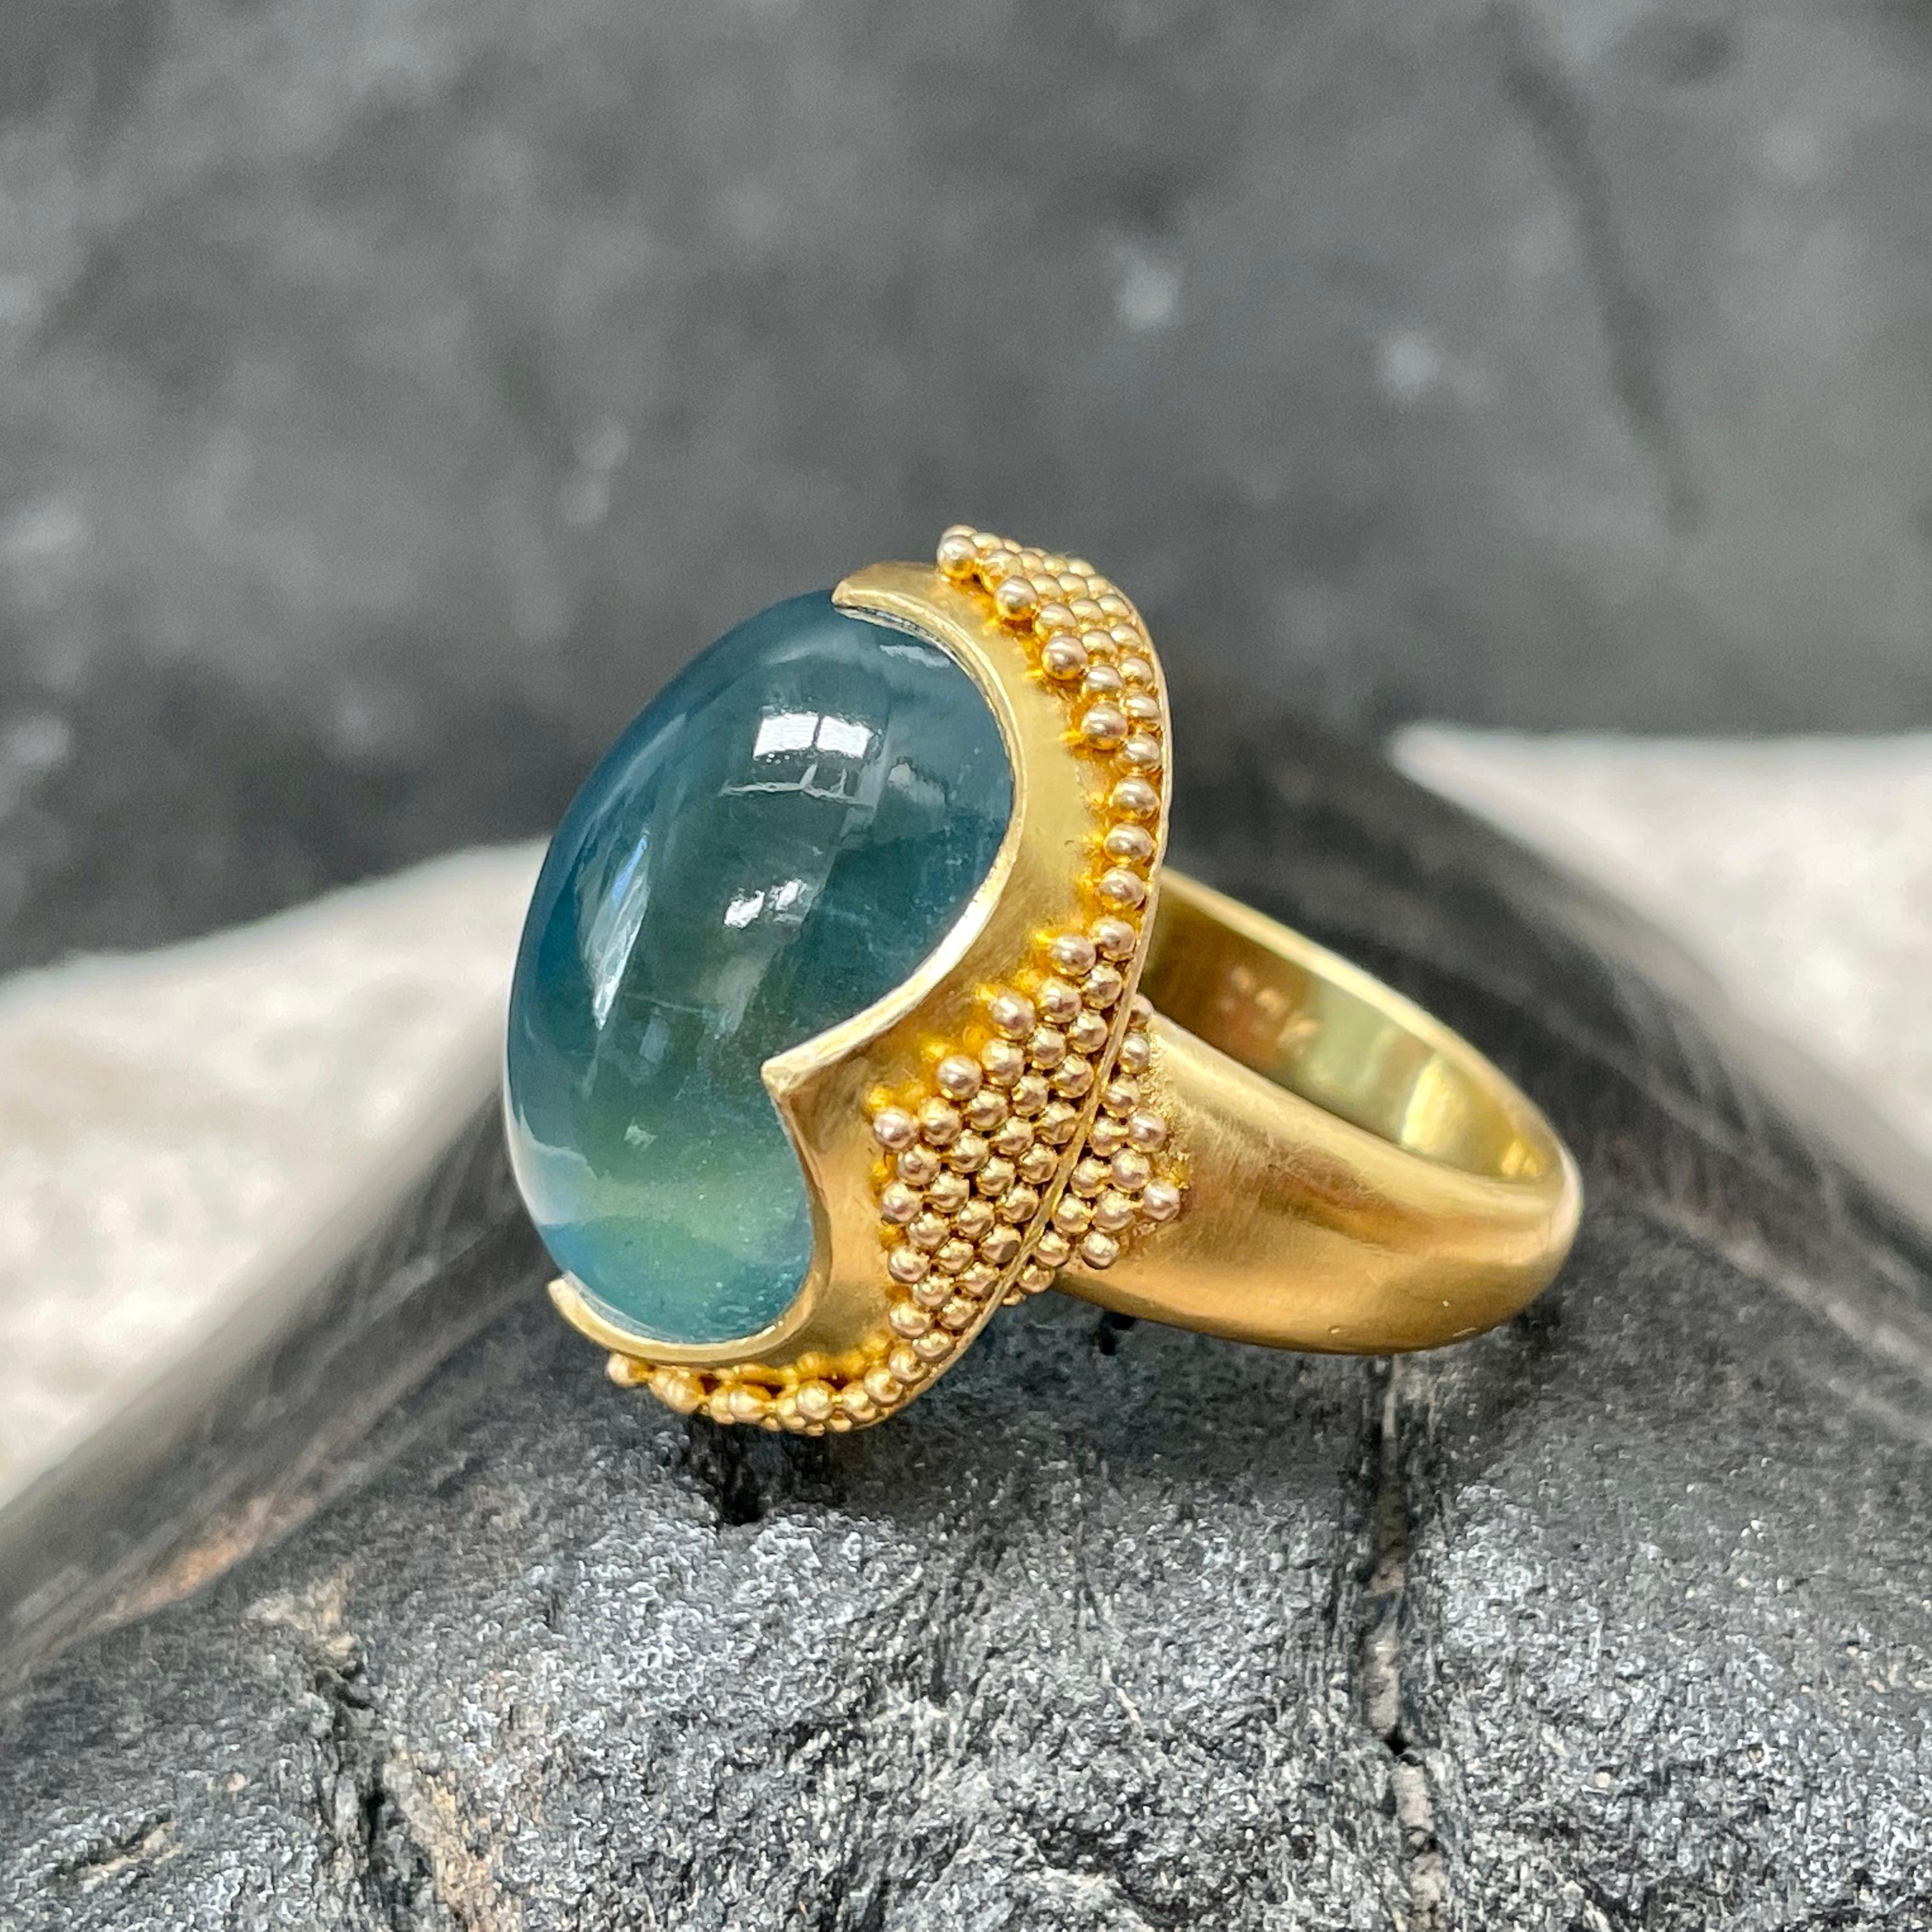 Steven Battelle 25.2 Carats Cabochon Aquamarine 22k Gold Ring In New Condition For Sale In Soquel, CA